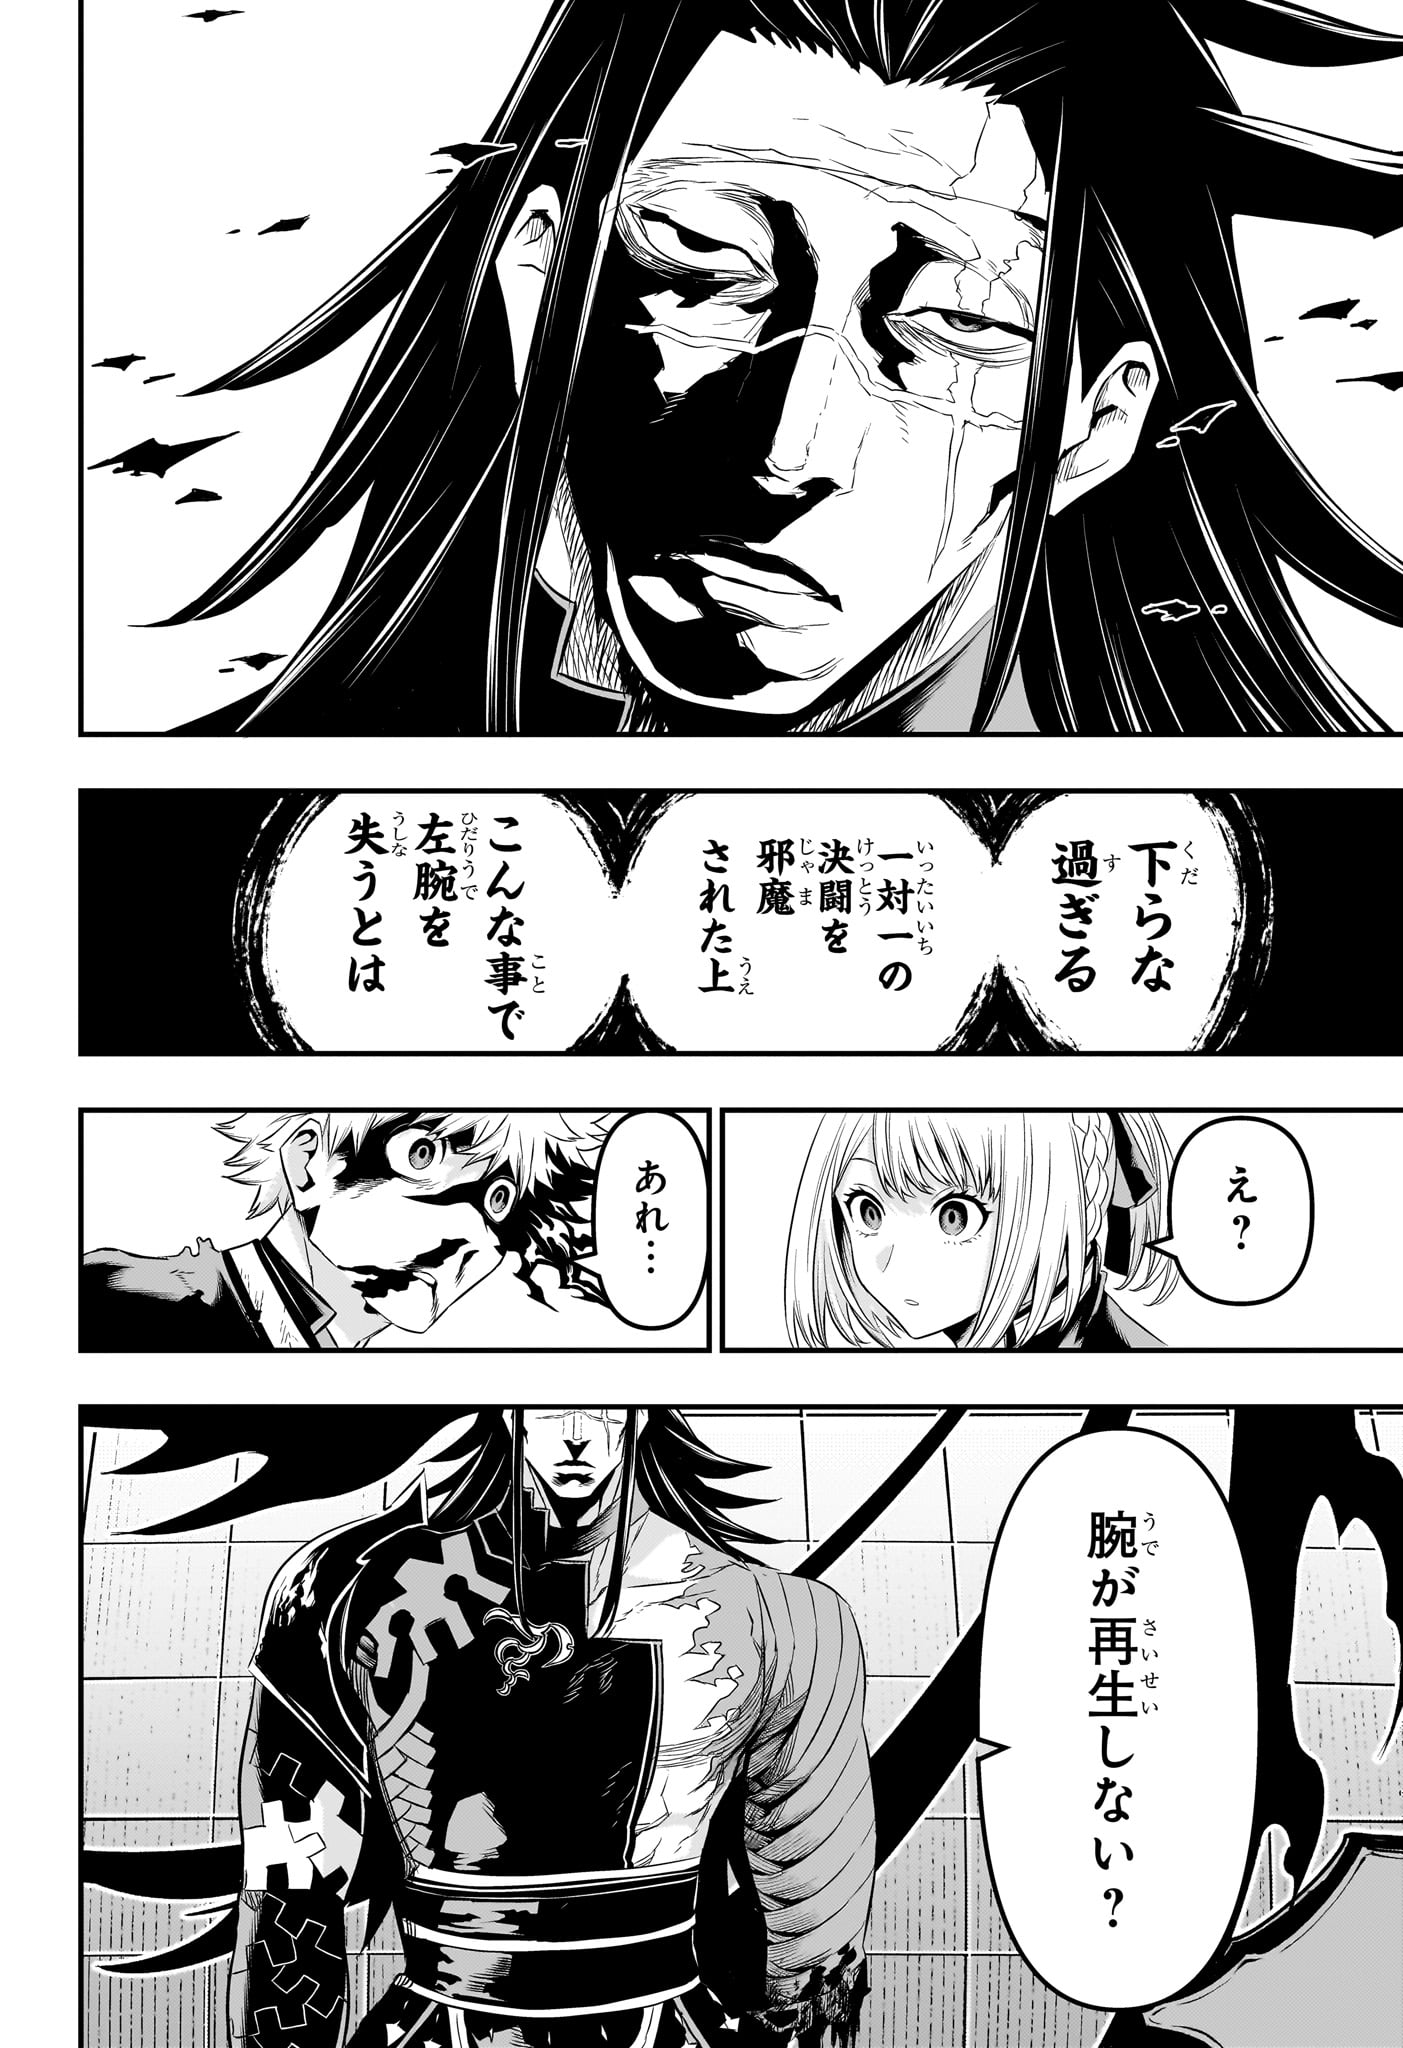 Nue no Onmyouji - Chapter 56 - Page 2